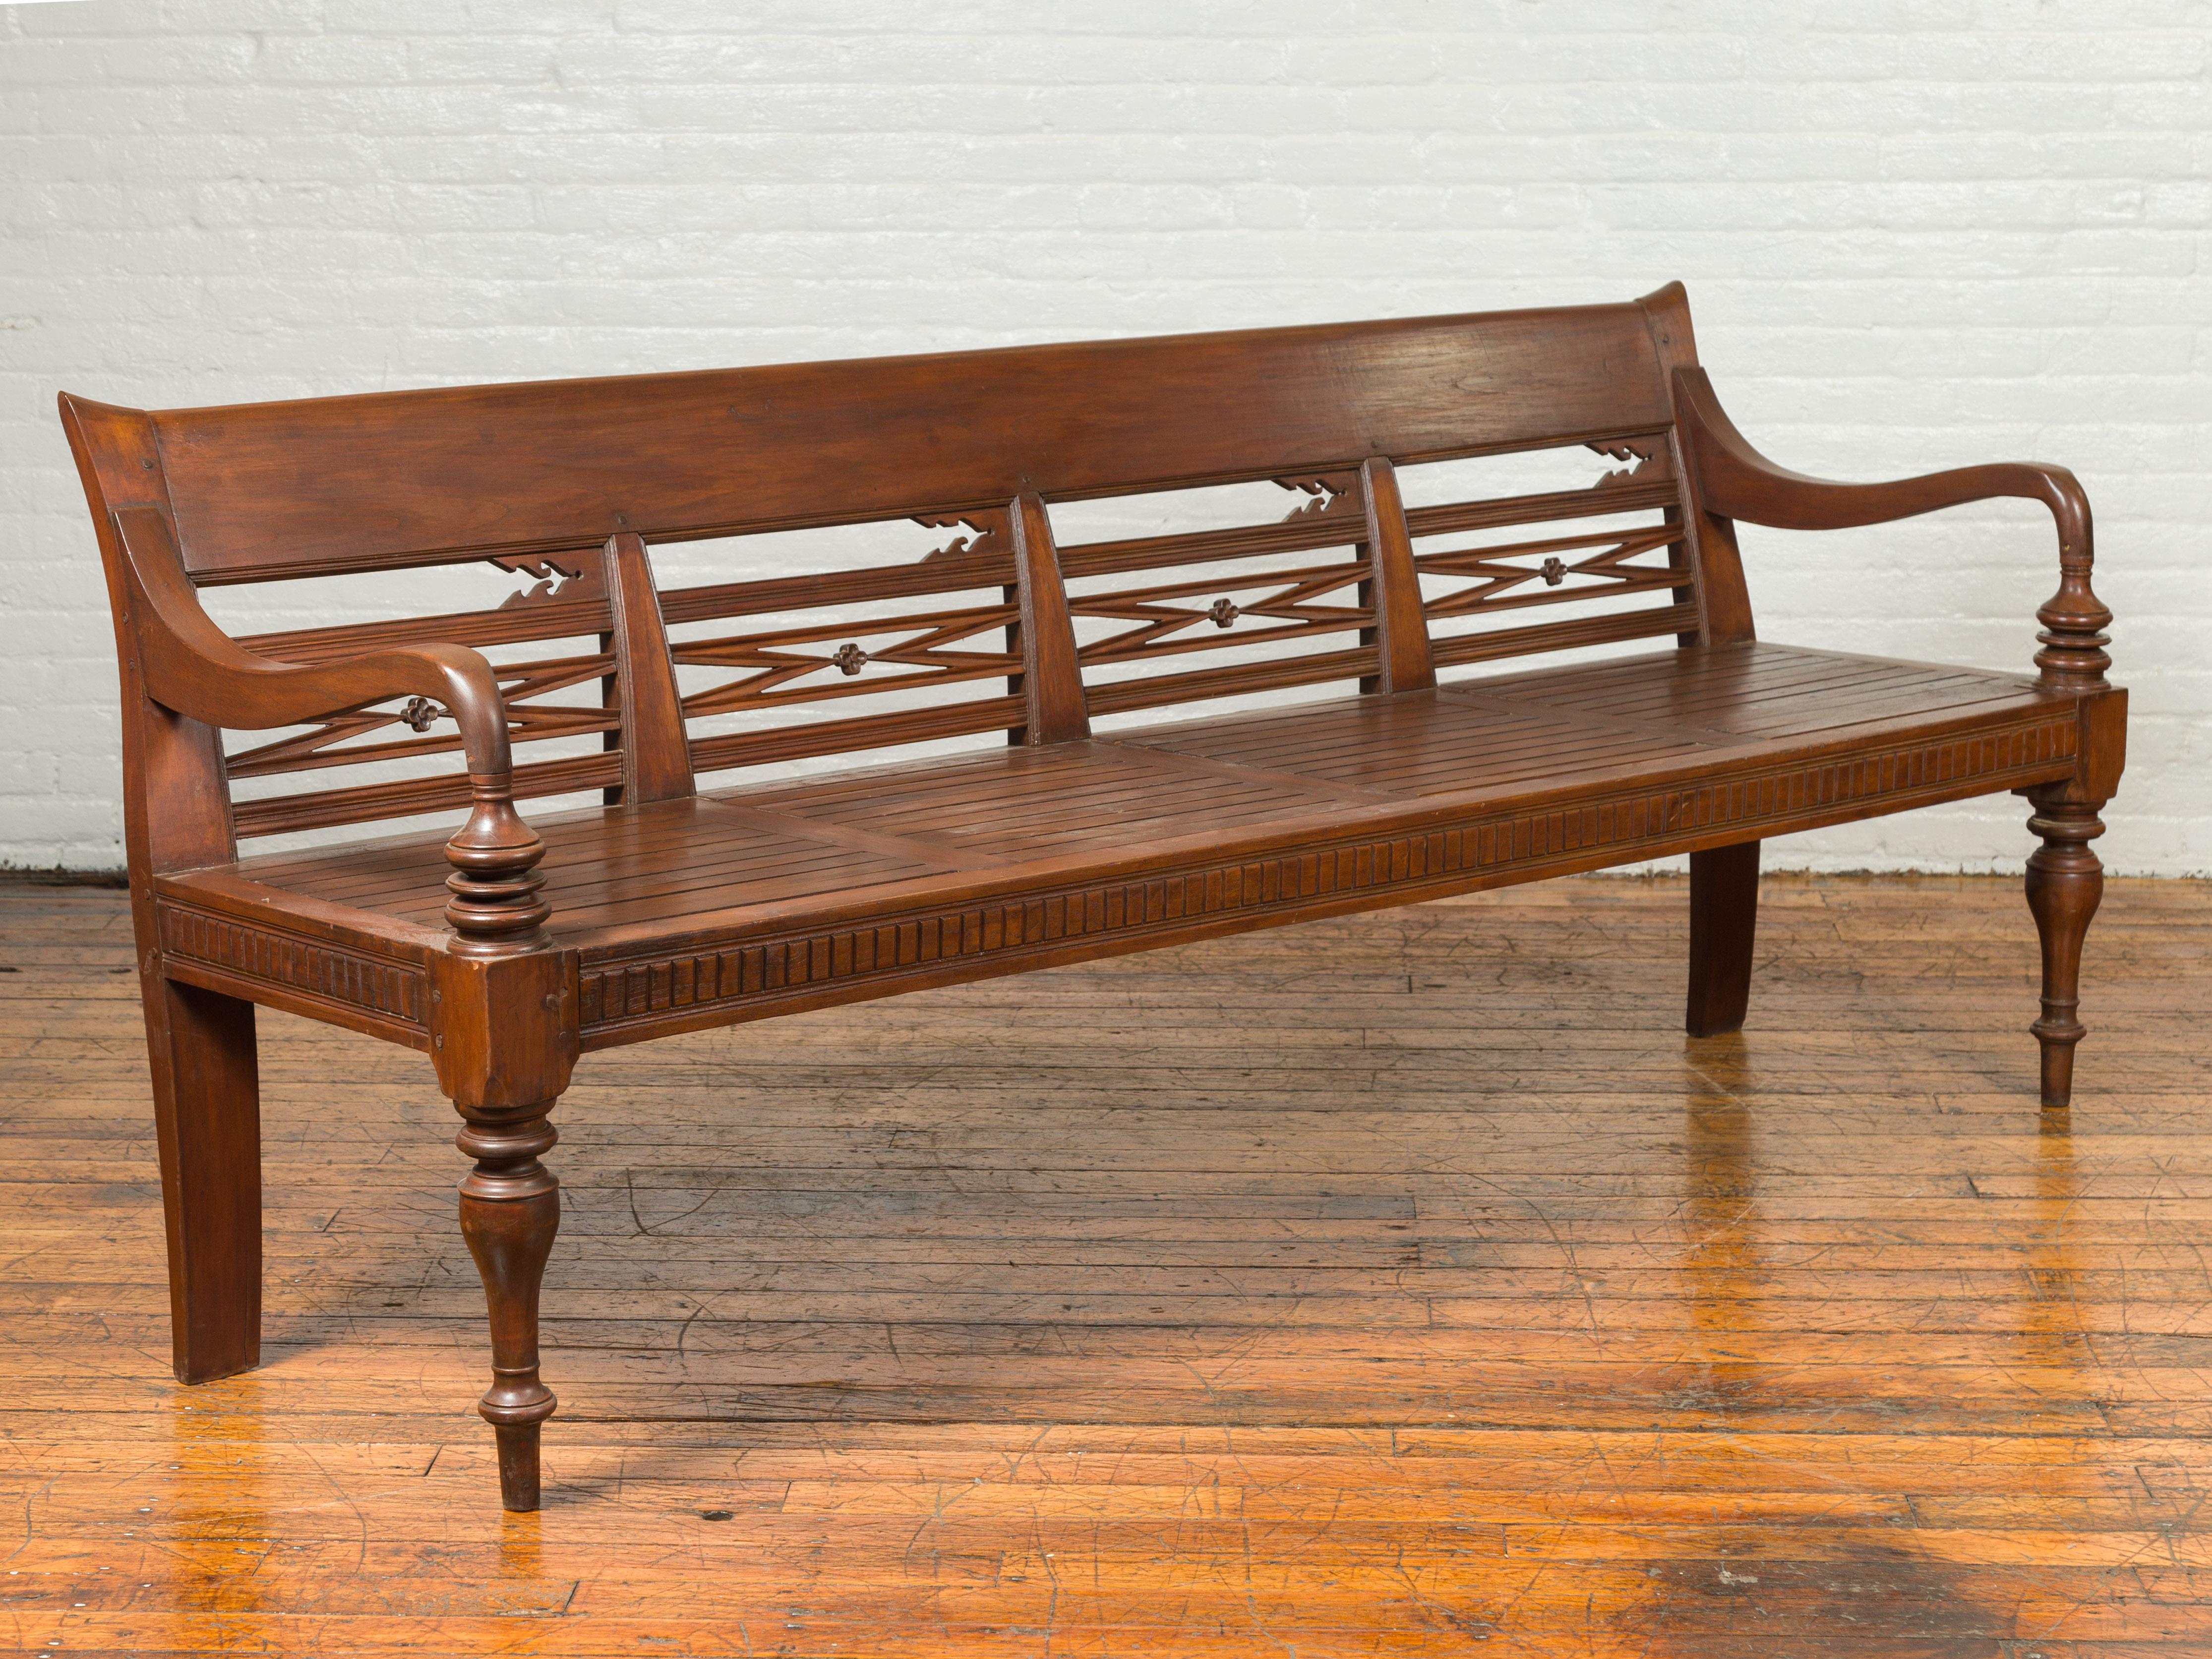 A Dutch Colonial Indonesian wooden garden bench from the 19th century, with pierced back, floral motifs and scrolling arms. Crafted in Indonesia during the later years of the 19th century, this Dutch Colonial bench features a slanted back pierced